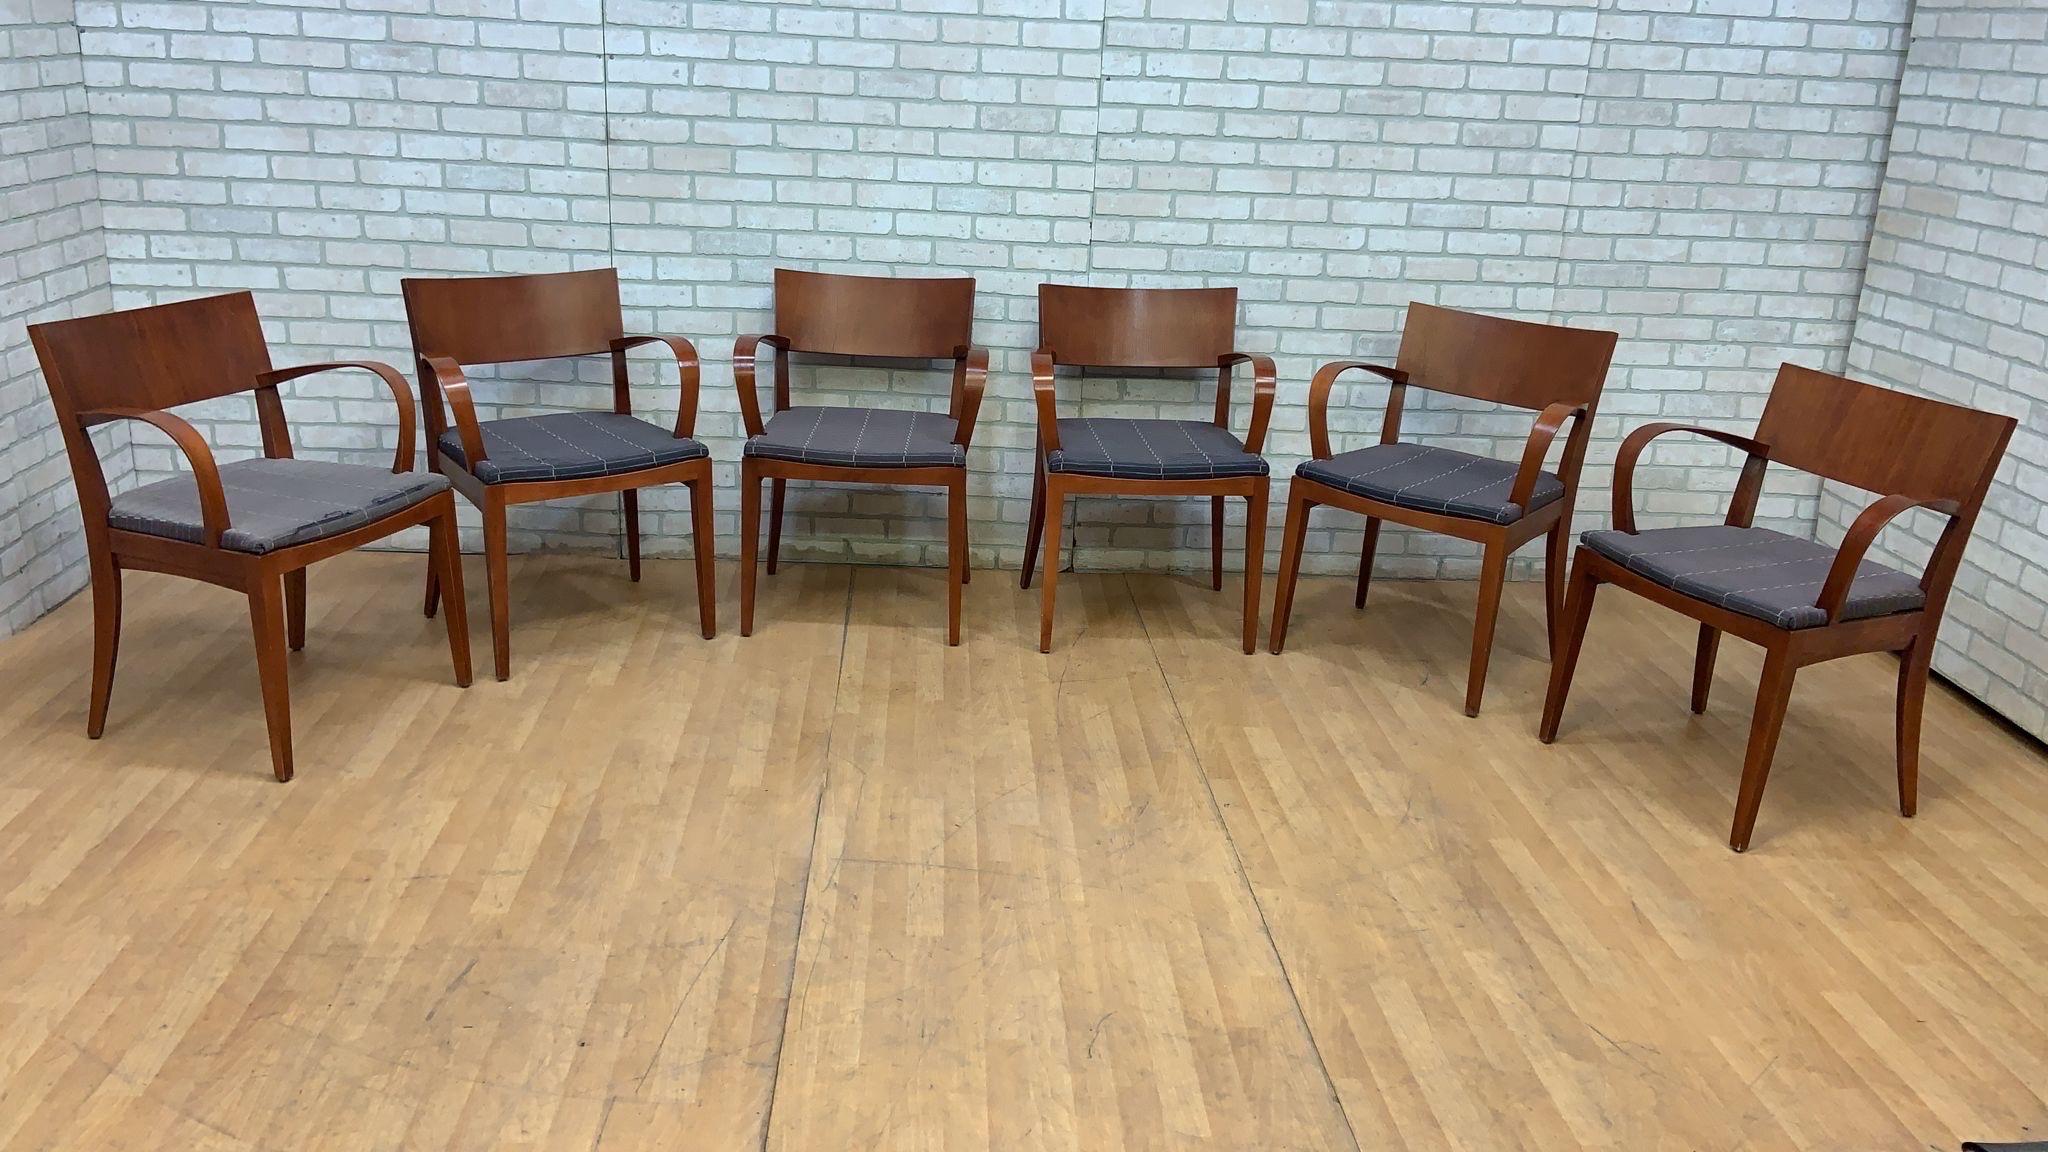 Contemporary Jonathan Crinion for Knoll Wood Side Dining Armchairs - Set of 6

These Crinion wood side chairs have soft lines and a modern feel. They are made of beechwood and have a navy striped fabric. These chairs can elevate any room.